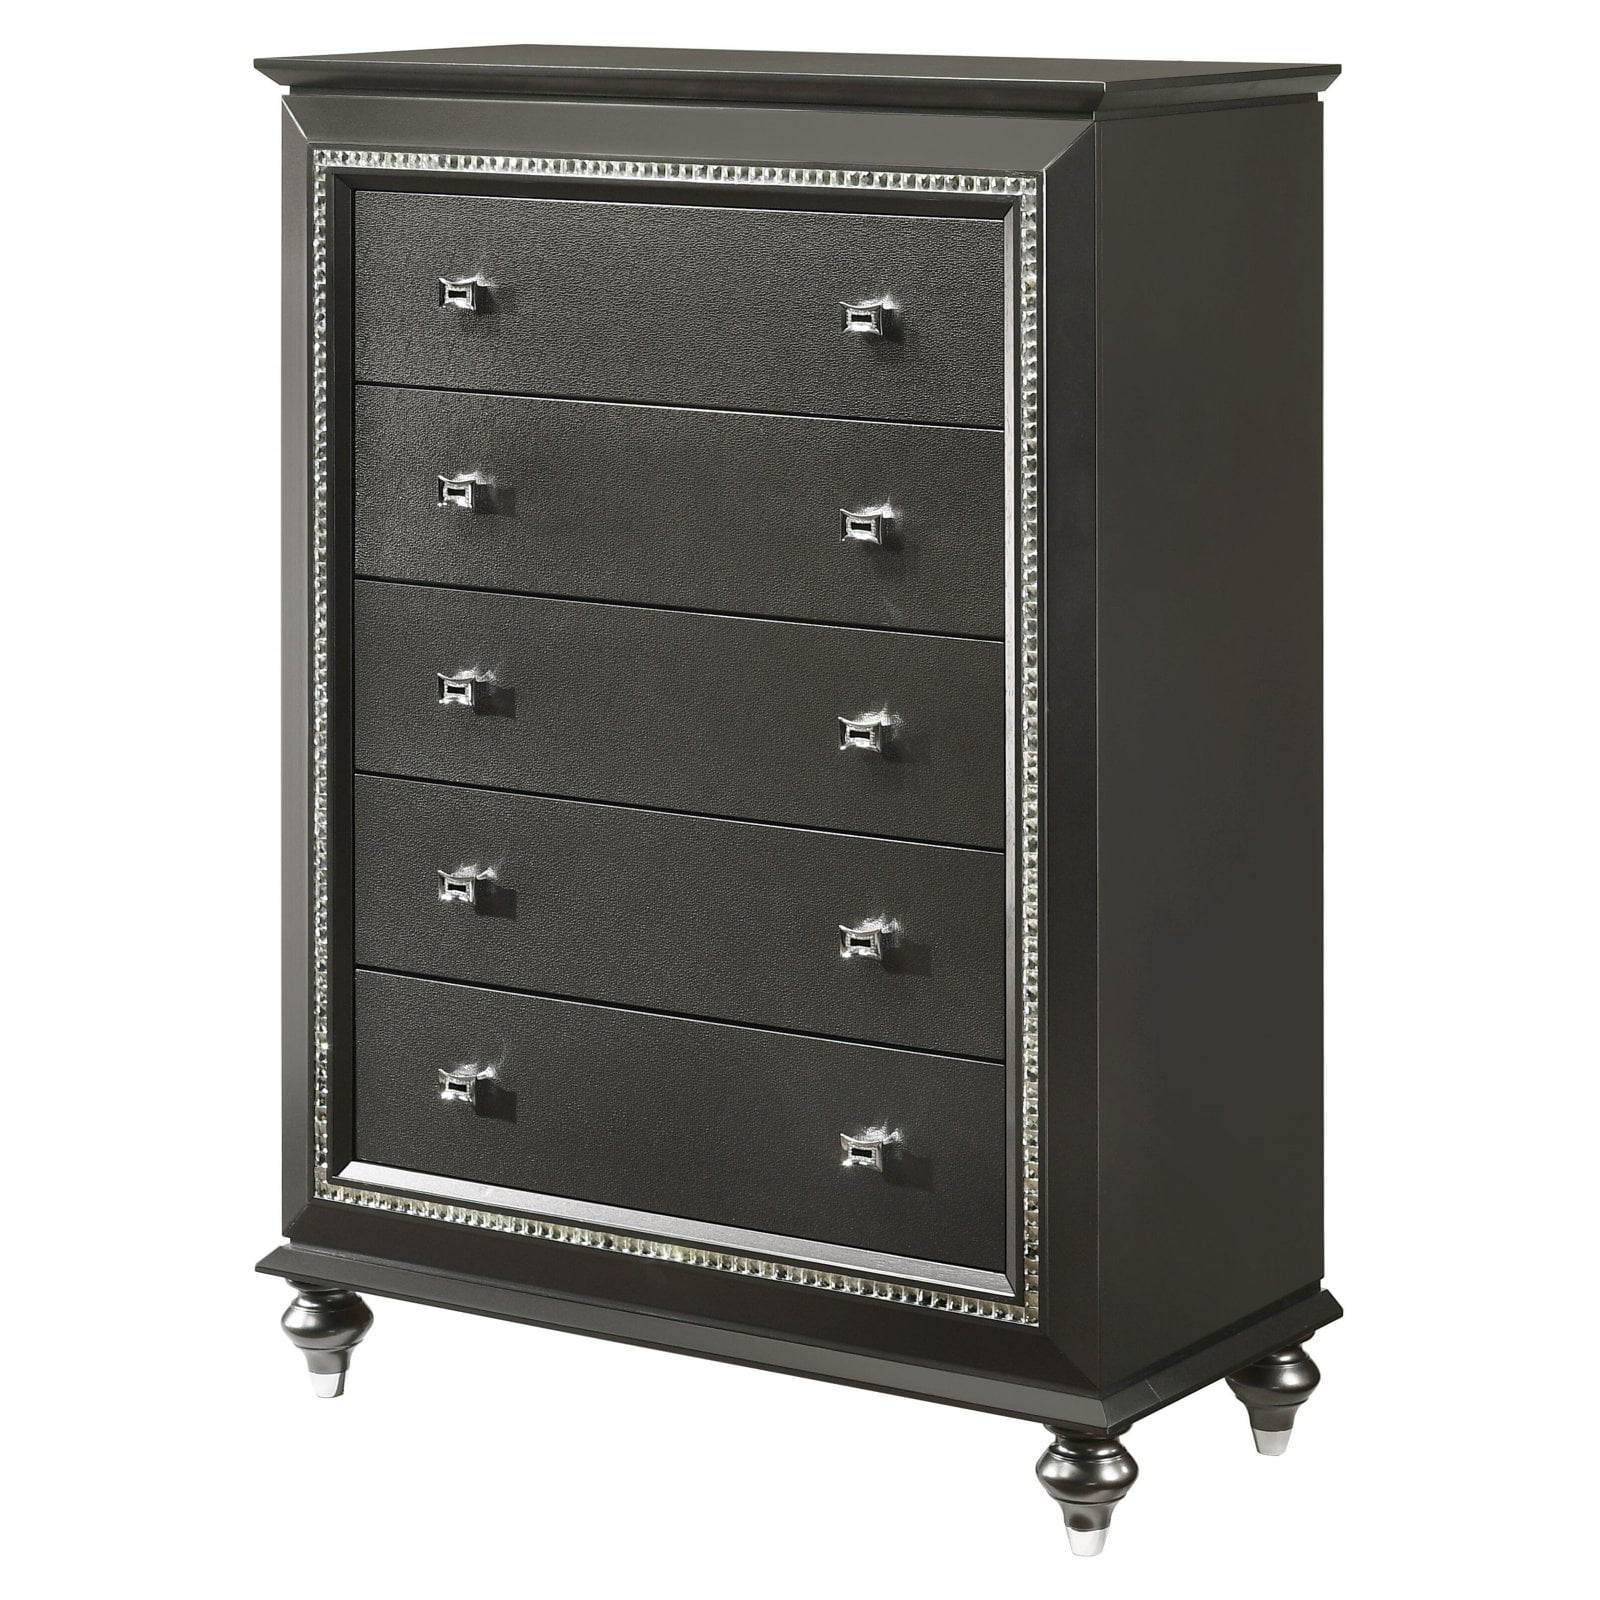 Picture of Acme Furniture 27286 38 x 18 x 54 in. Kaitlyn Chest, Metallic Gray